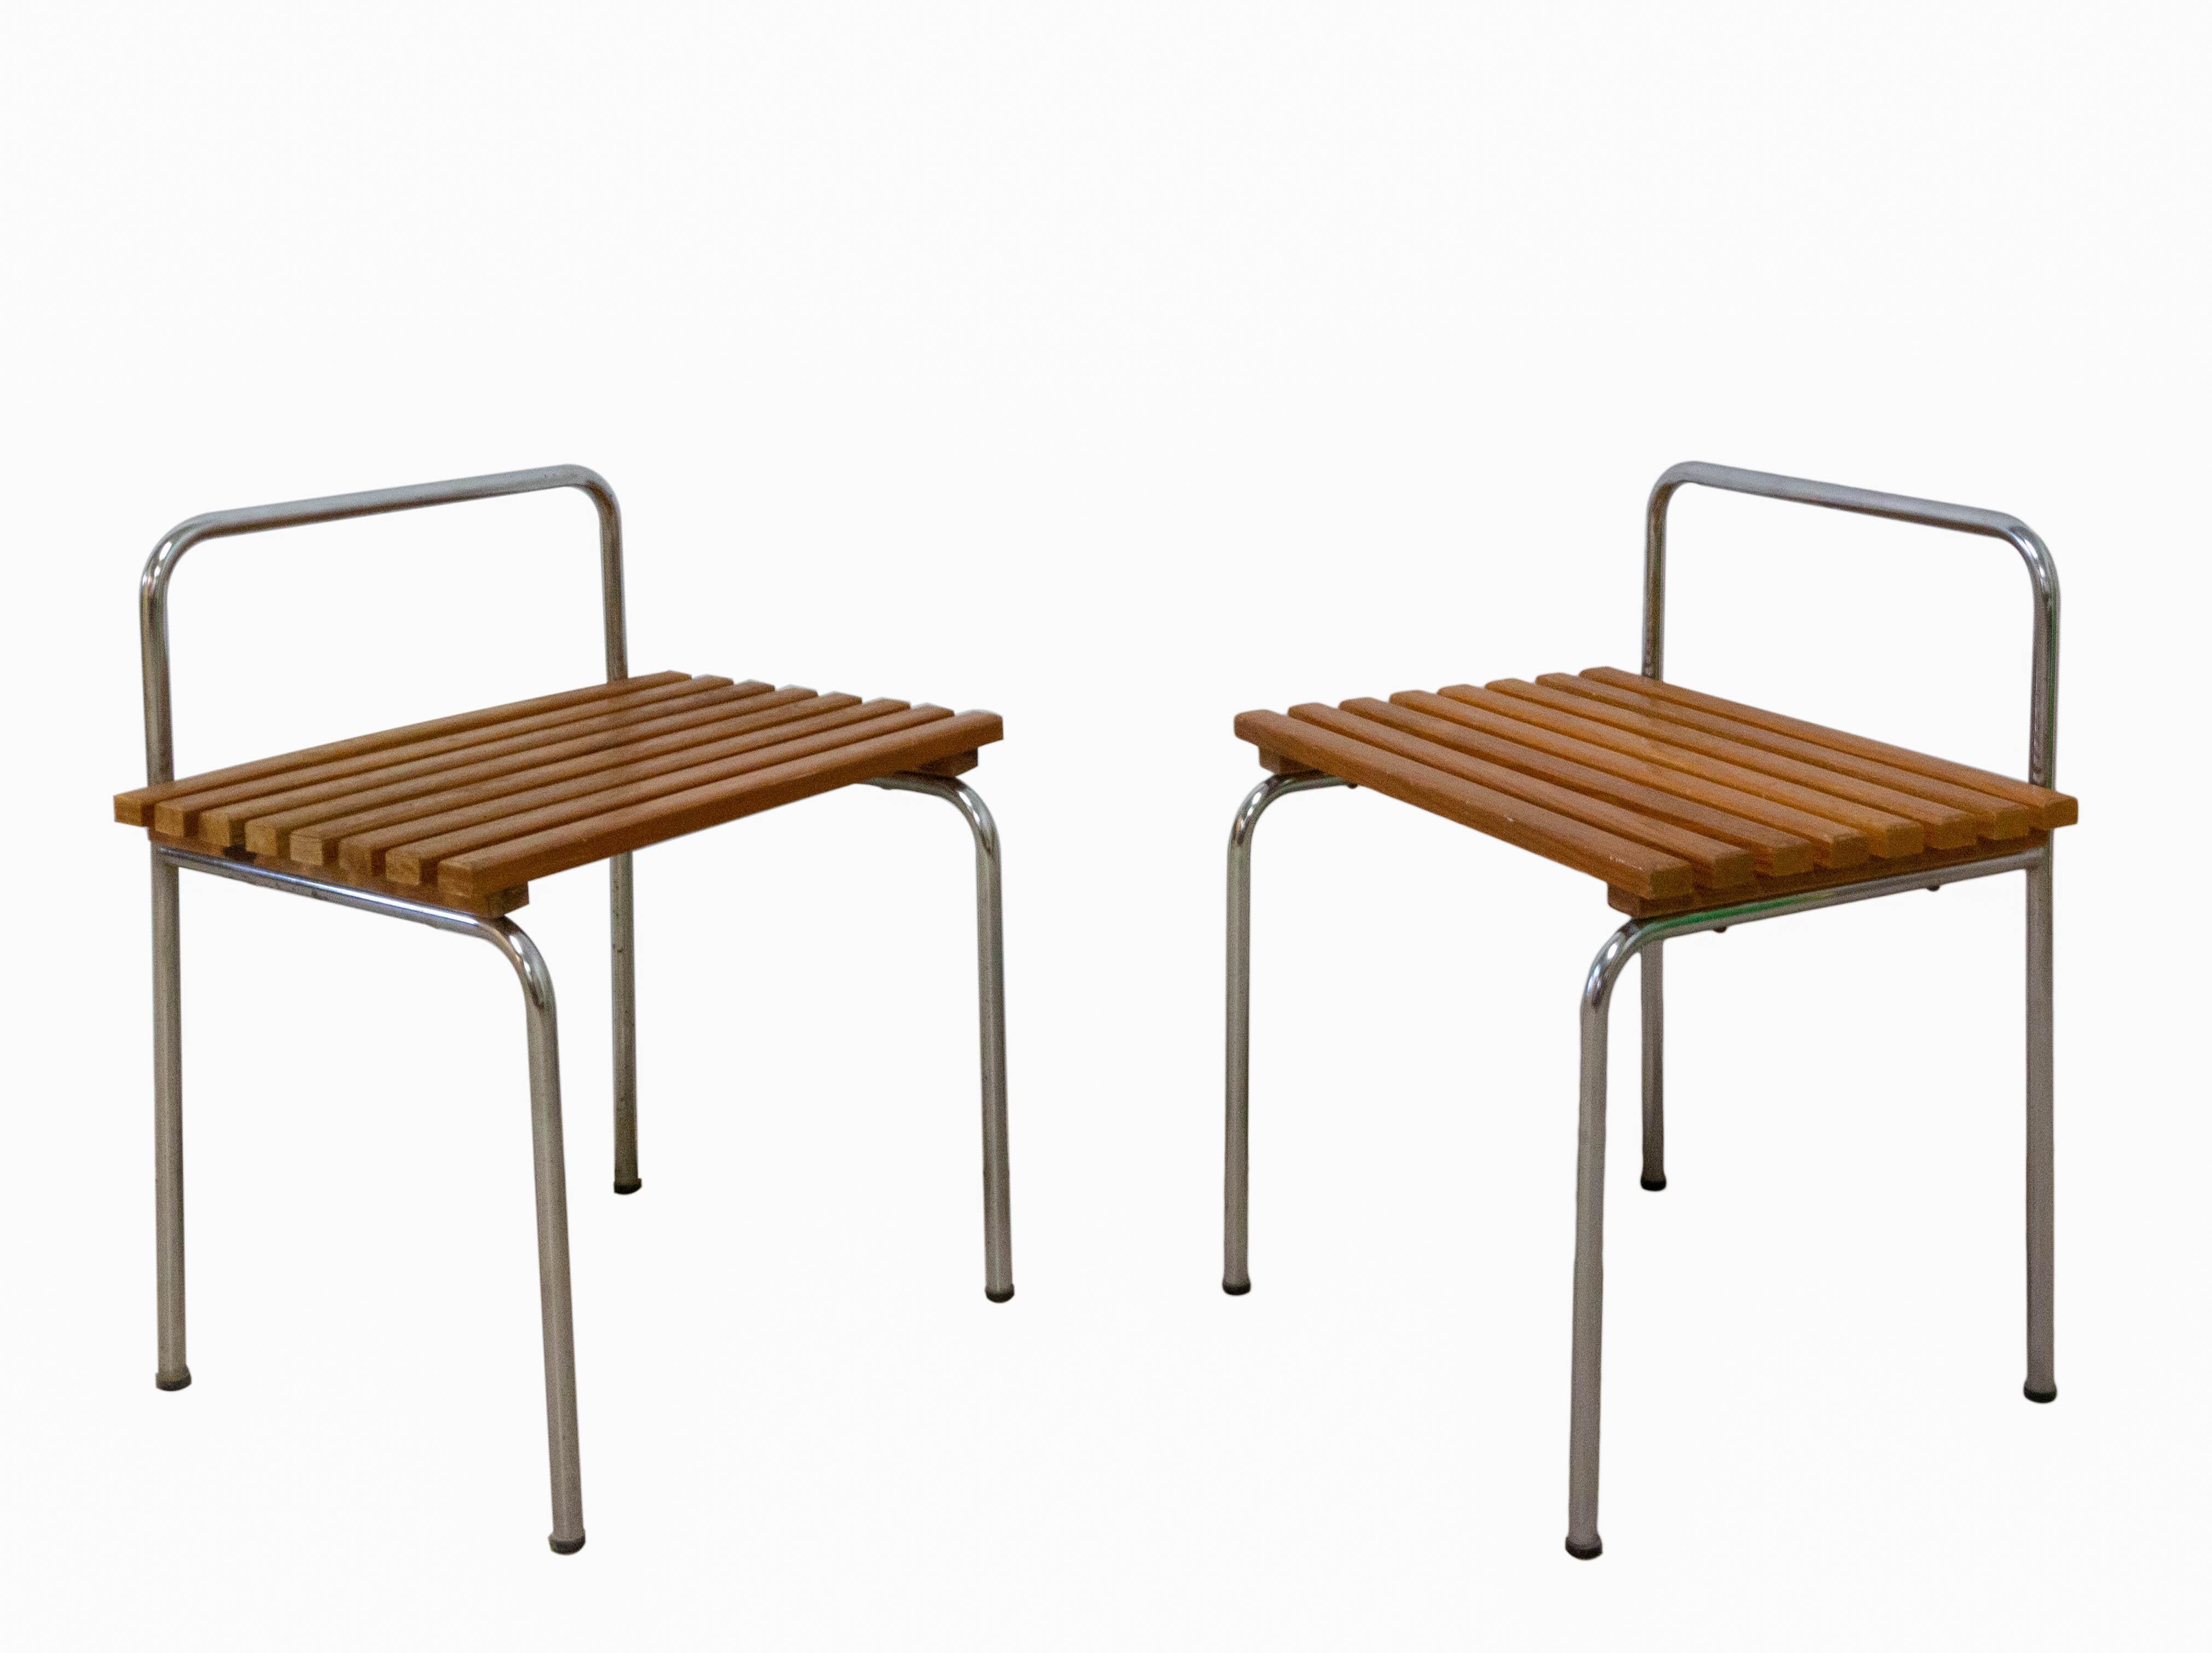 Luggage rack made by Charlotte Perriand, circa 1968 for the ski resort Les Arcs. Support formed by wooden slats, resting on a chromed metal structure.



Shipping: 64/51/41 
Wooden case 68 45 55 cm Kg 18.
 